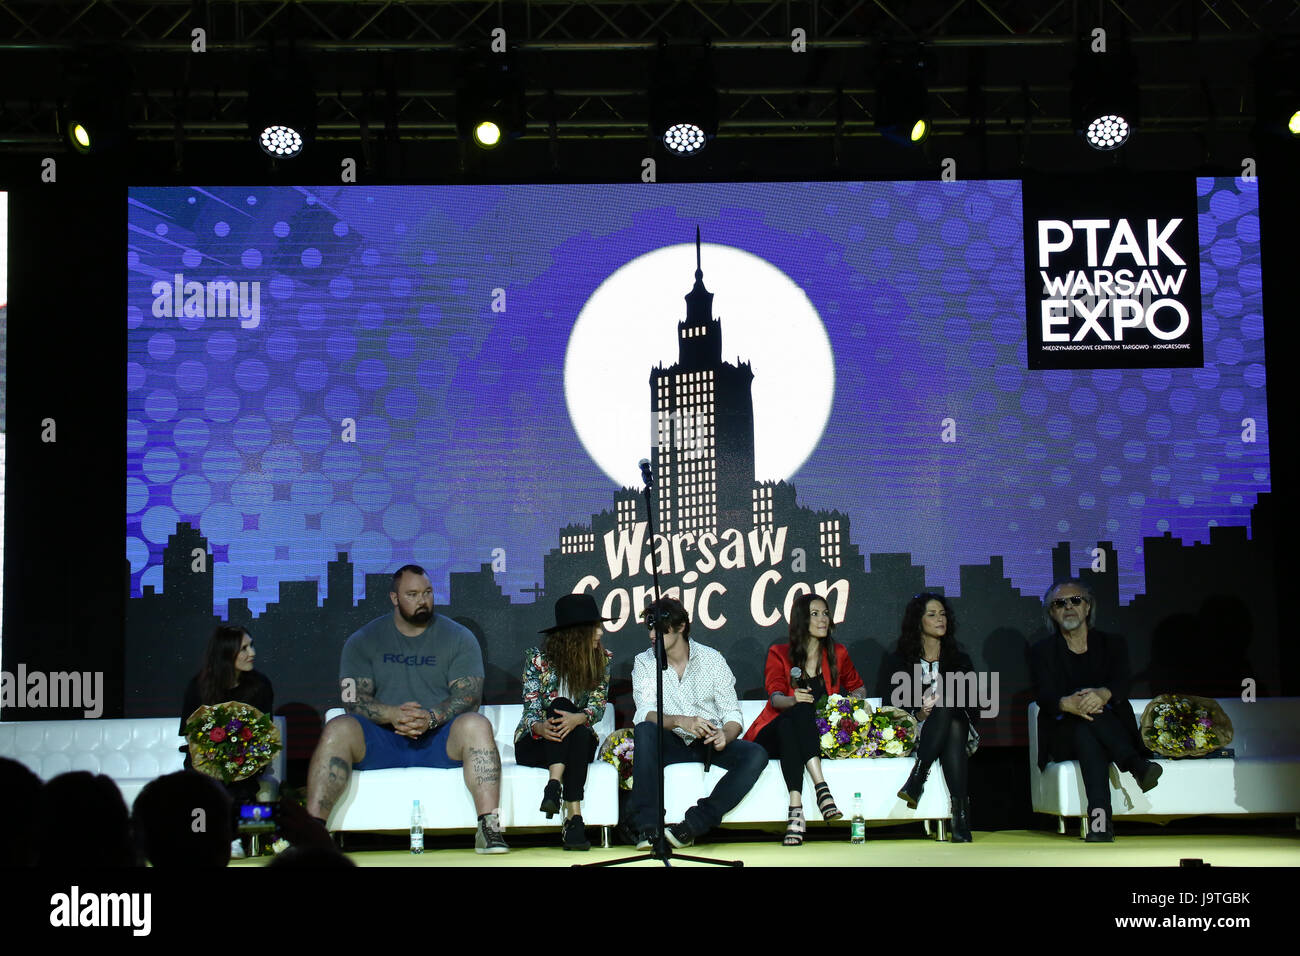 Poland, Nadarzyn, June 3rd, 2017: First Warsaw Comic Con hosts composer Jan Kaczmarek and actors Nadia Hilker, Melissa Ponzio, Carice van Houten, Hafpor Julius Björnsson and RJ Mitte. Ptak Warsaw Expo CEO Tomasz Szypula welcomes celebrity guest on stage. Thousands of cosplay, Star Wars and role palying fans hit the event. Game tournaments take place at several arenas. ©Jake Ratz/Alamy Live News Stock Photo